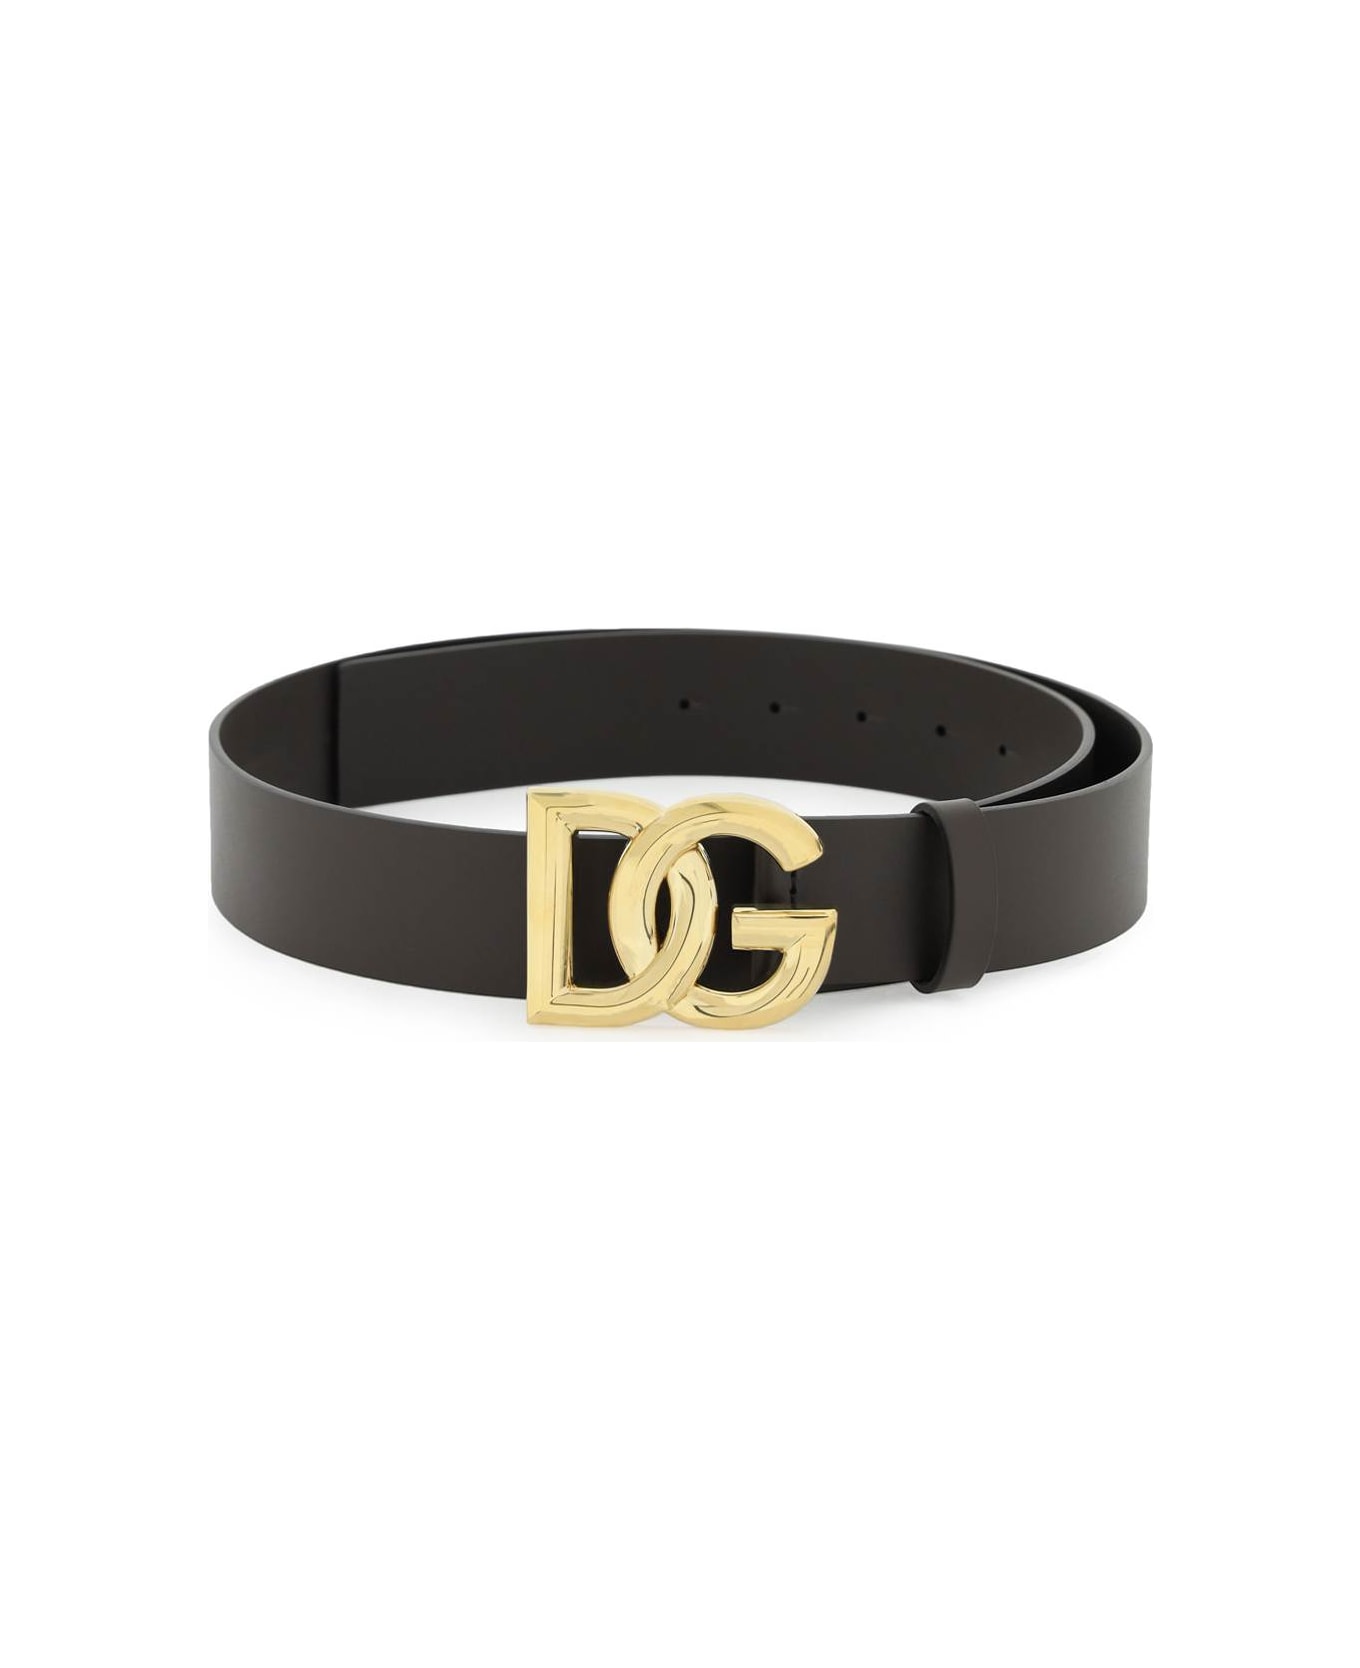 Dolce & Gabbana Lux Leather Belt With Dg Buckle - MORO ORO (Brown)